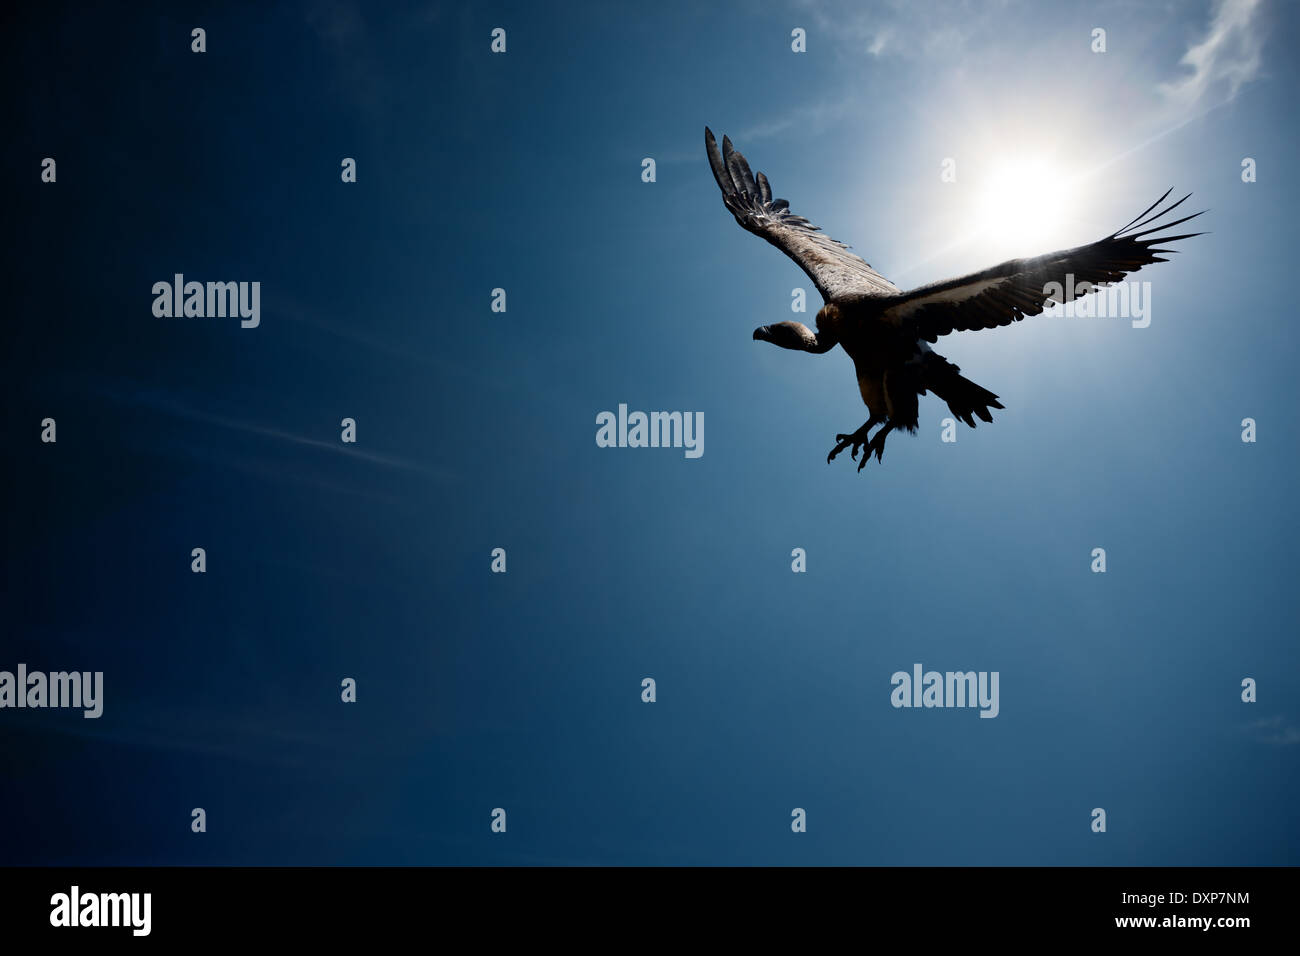 Vulture flying in front of the sun with blue sky (digital composite) Stock Photo